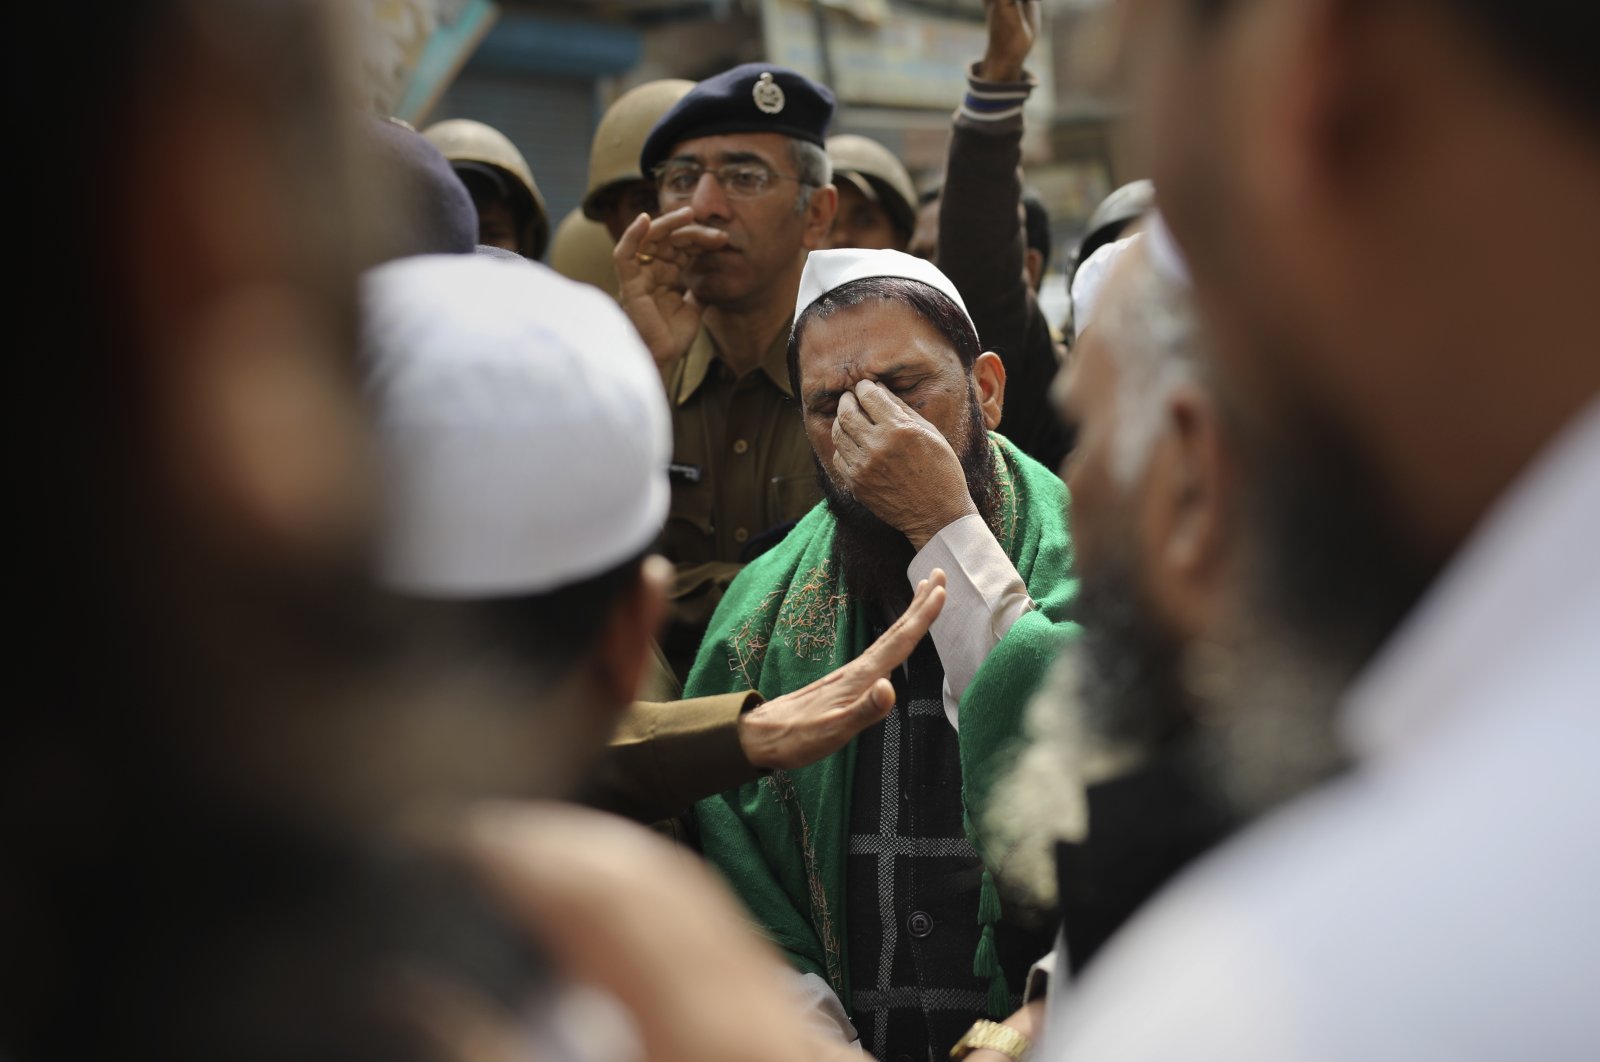 A man gestures as a senior Delhi police officer speaks to a group of Muslims ahead of Friday prayers near a heavily policed, fire-bombed mosque in New Delhi, India, Feb. 28, 2020. (AP Photo)